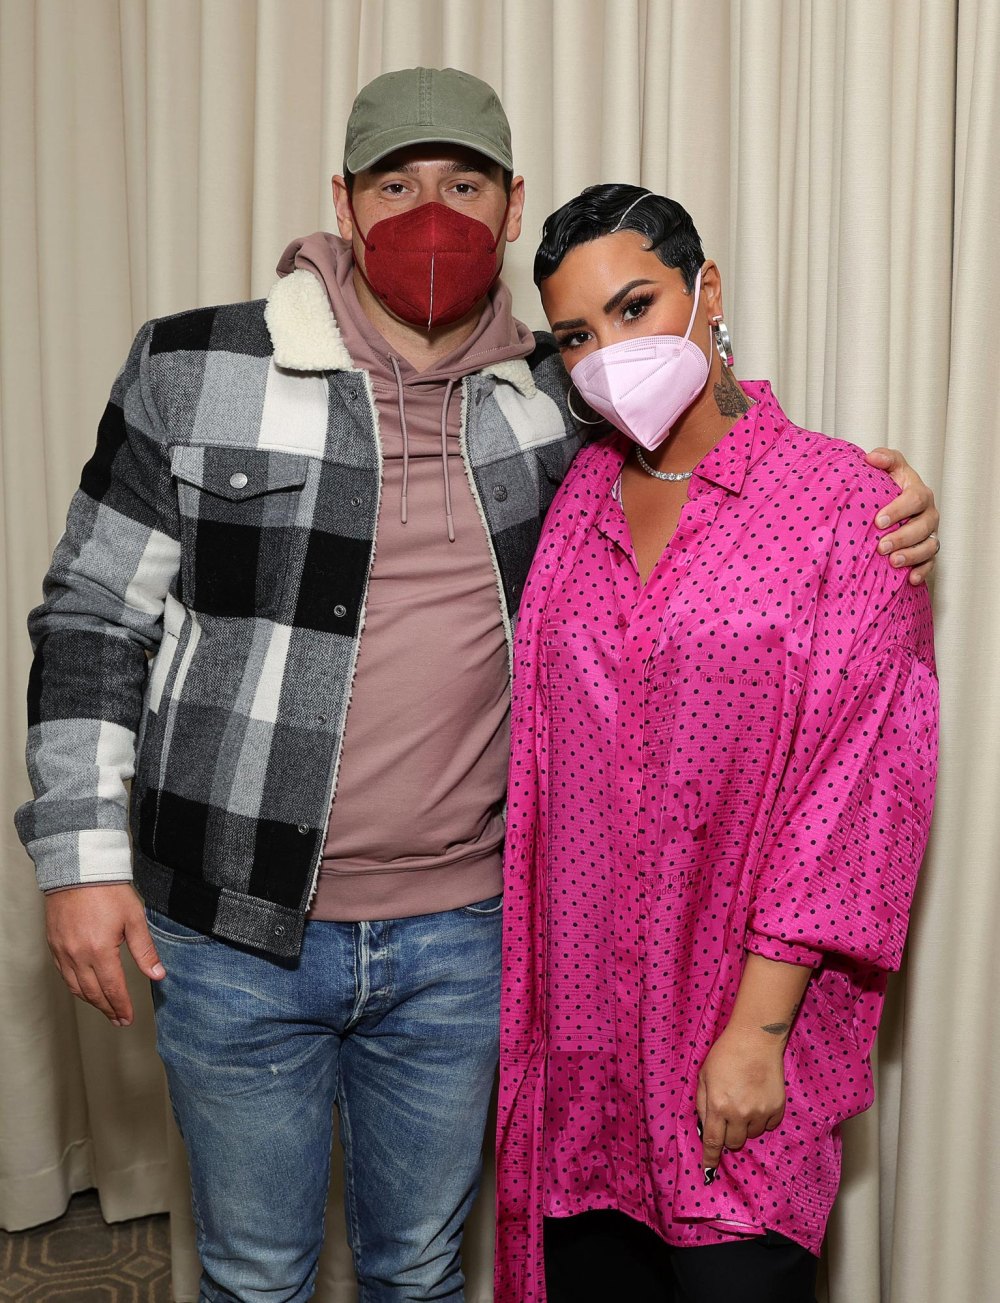 Demi Lovato Reportedly Parted Ways With Manager Scooter Braun Following Justin Bieber Split Rumors 255 Inline 2